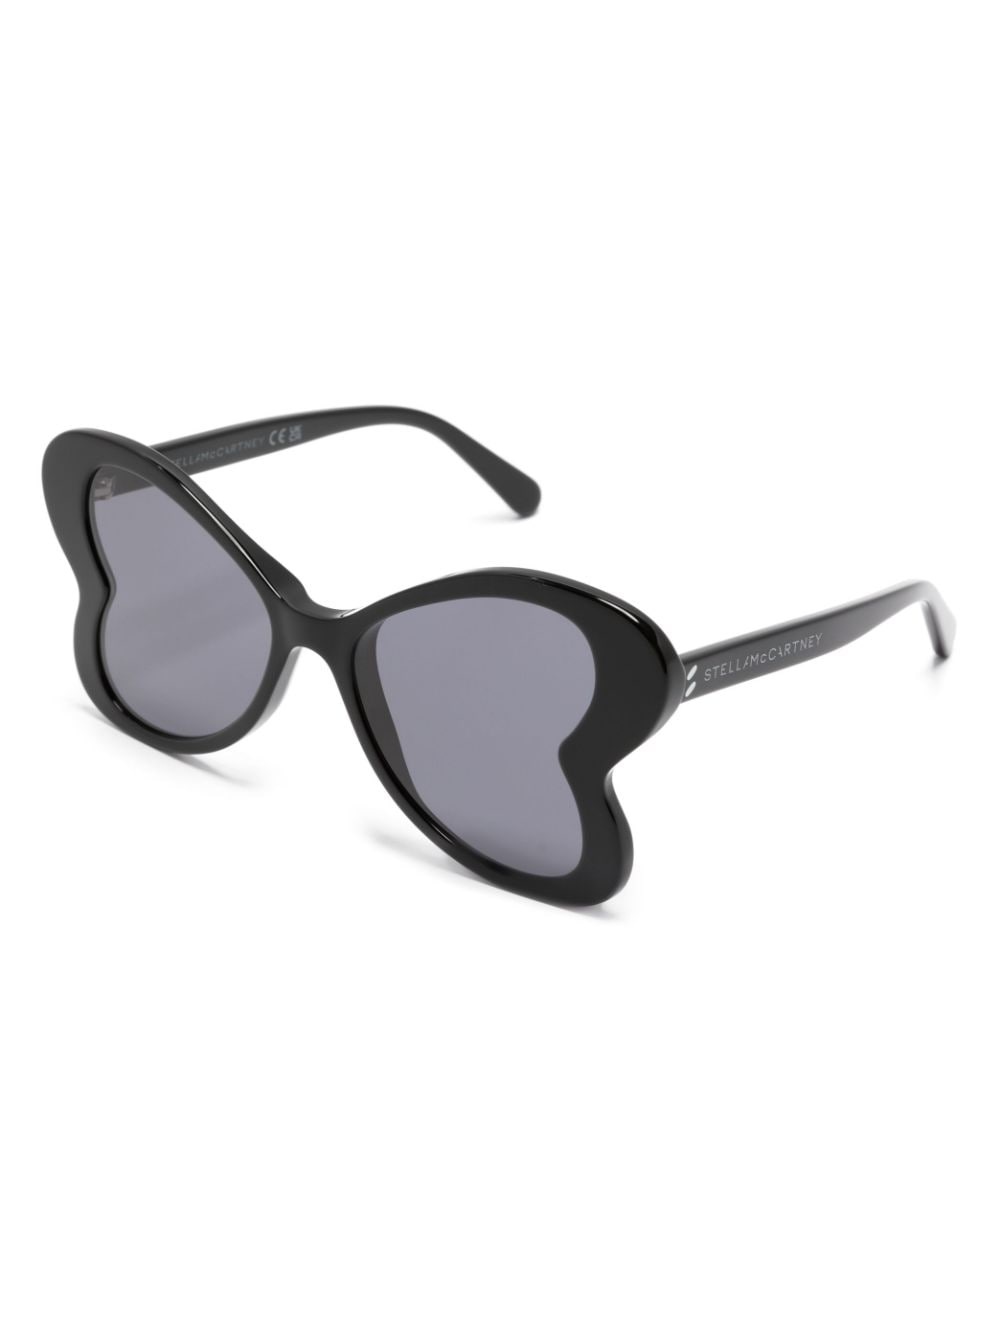 butterfly-frame sunglasses - 2